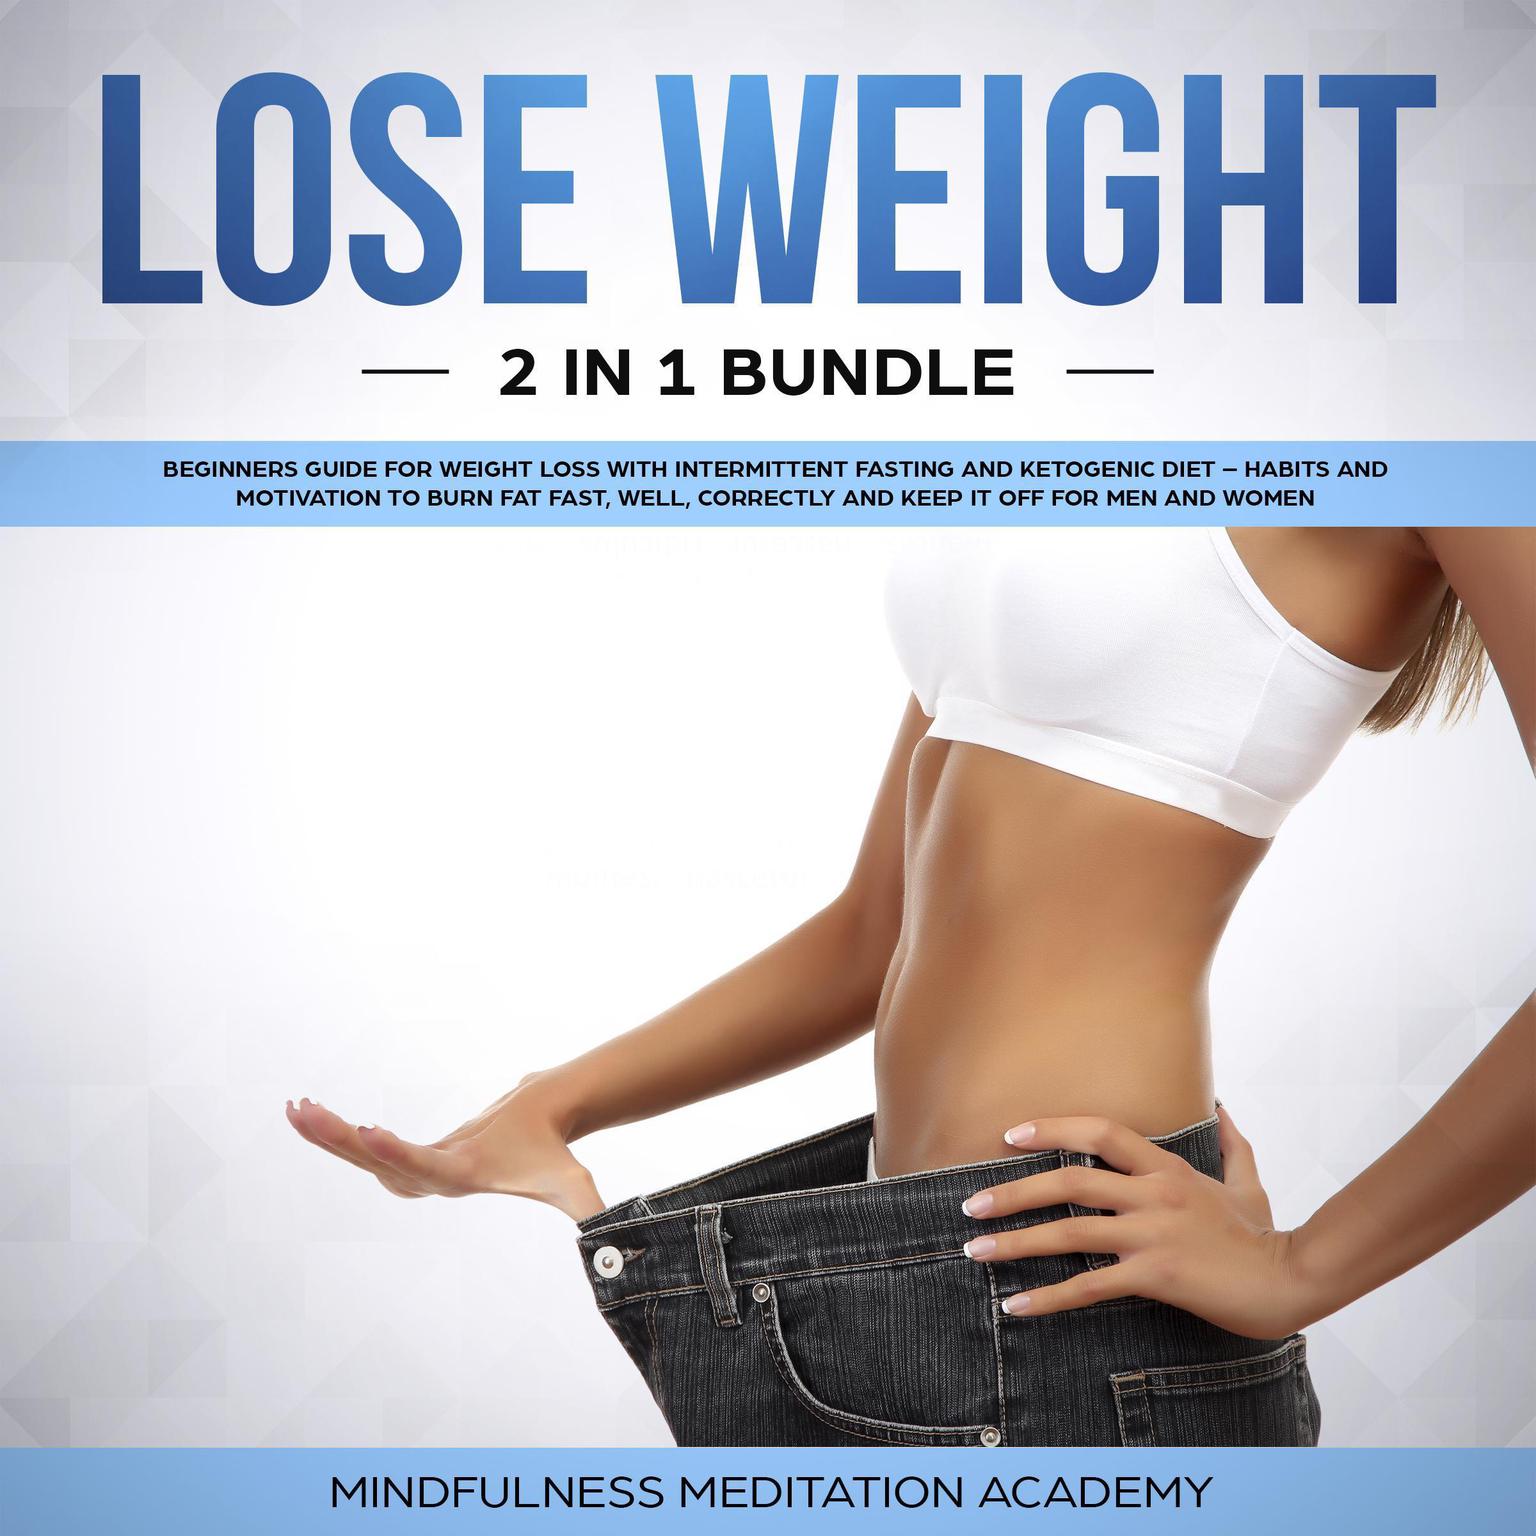 Lose Weight 2 in 1 Bundle: Beginners Guide for Weight Loss with Intermittent Fasting and Ketogenic Diet – Habits and Motivation to burn Fat fast, well, correctly and keep It off for Men and Women Audiobook, by Mindfulness Meditation Academy